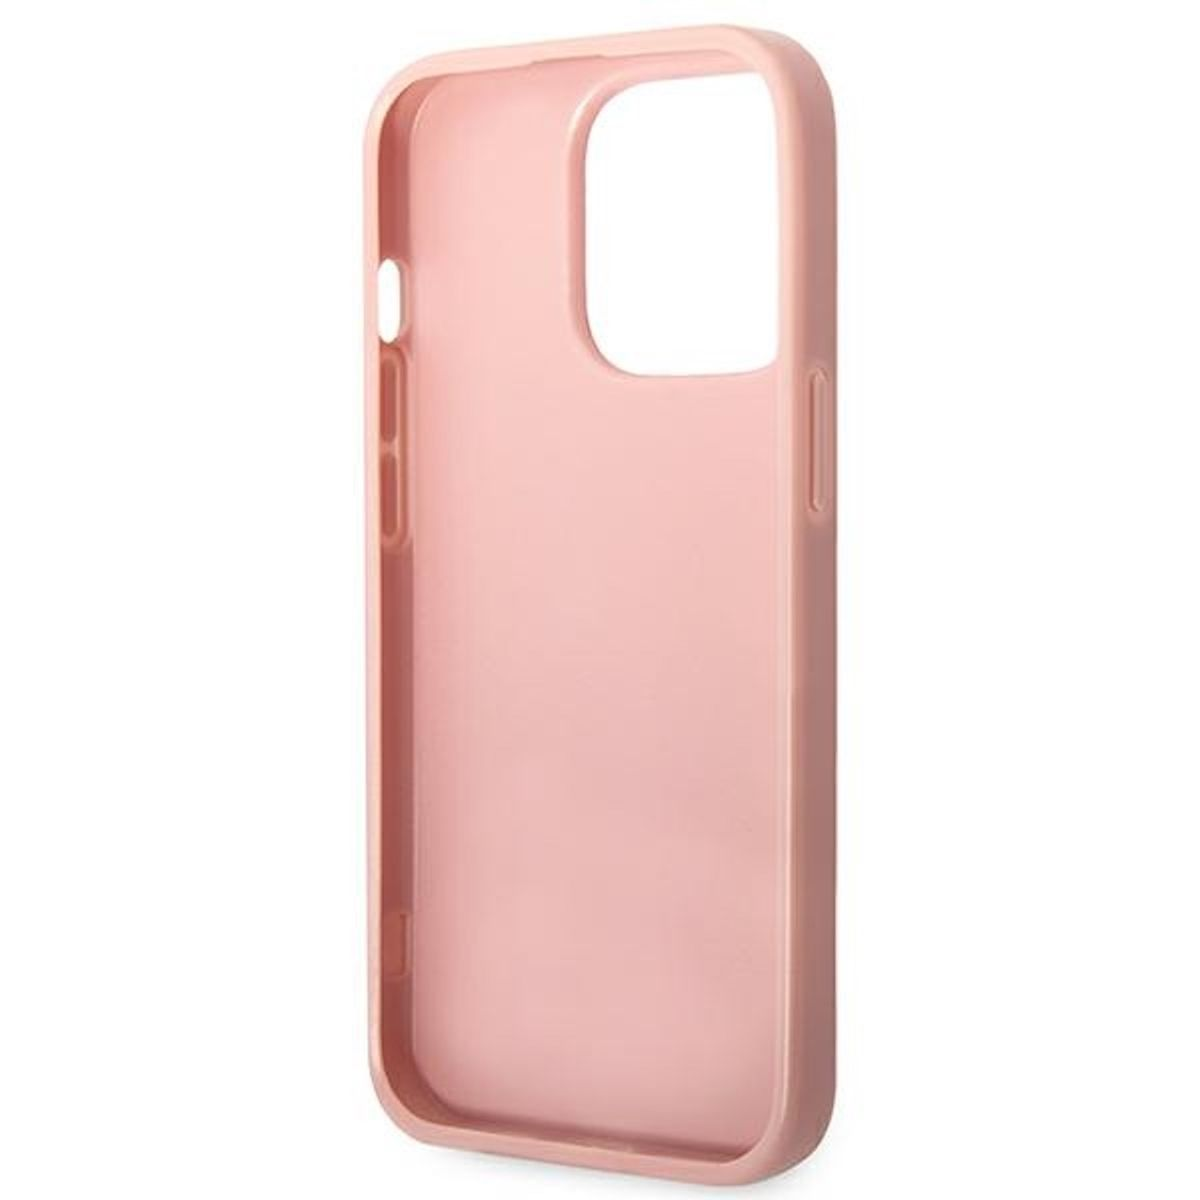 Pro Pink Collection Design Glitter Backcover, iPhone GUESS Max, Hülle, Apple, 14 Script